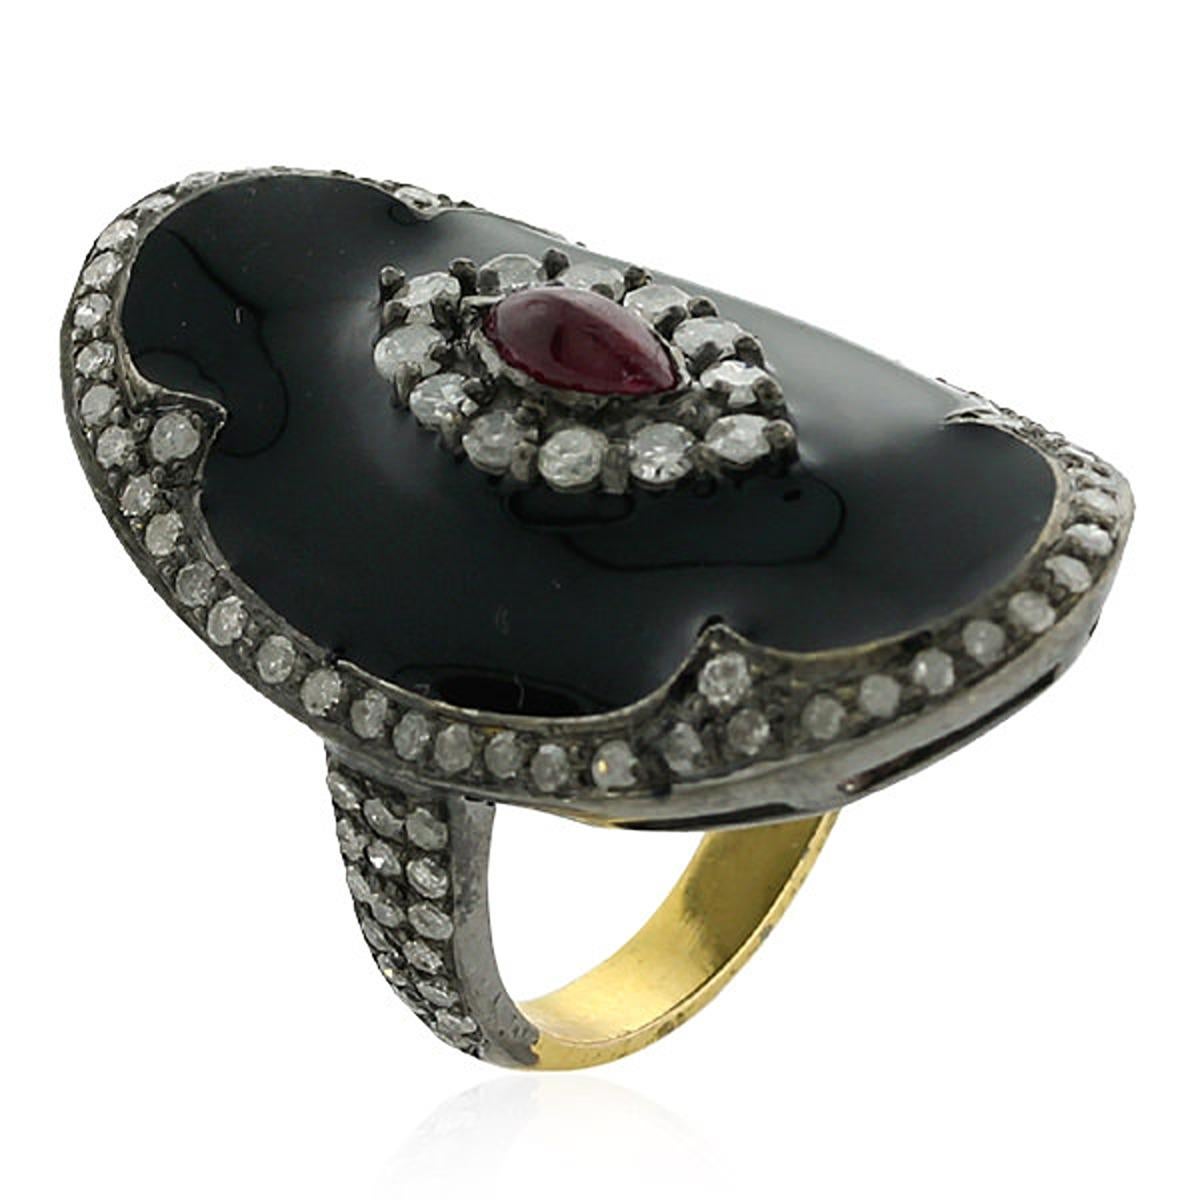 Mixed Cut Pave Diamond Black Enamel Ring With Ruby Made In 18k Yellow Gold & Silver For Sale